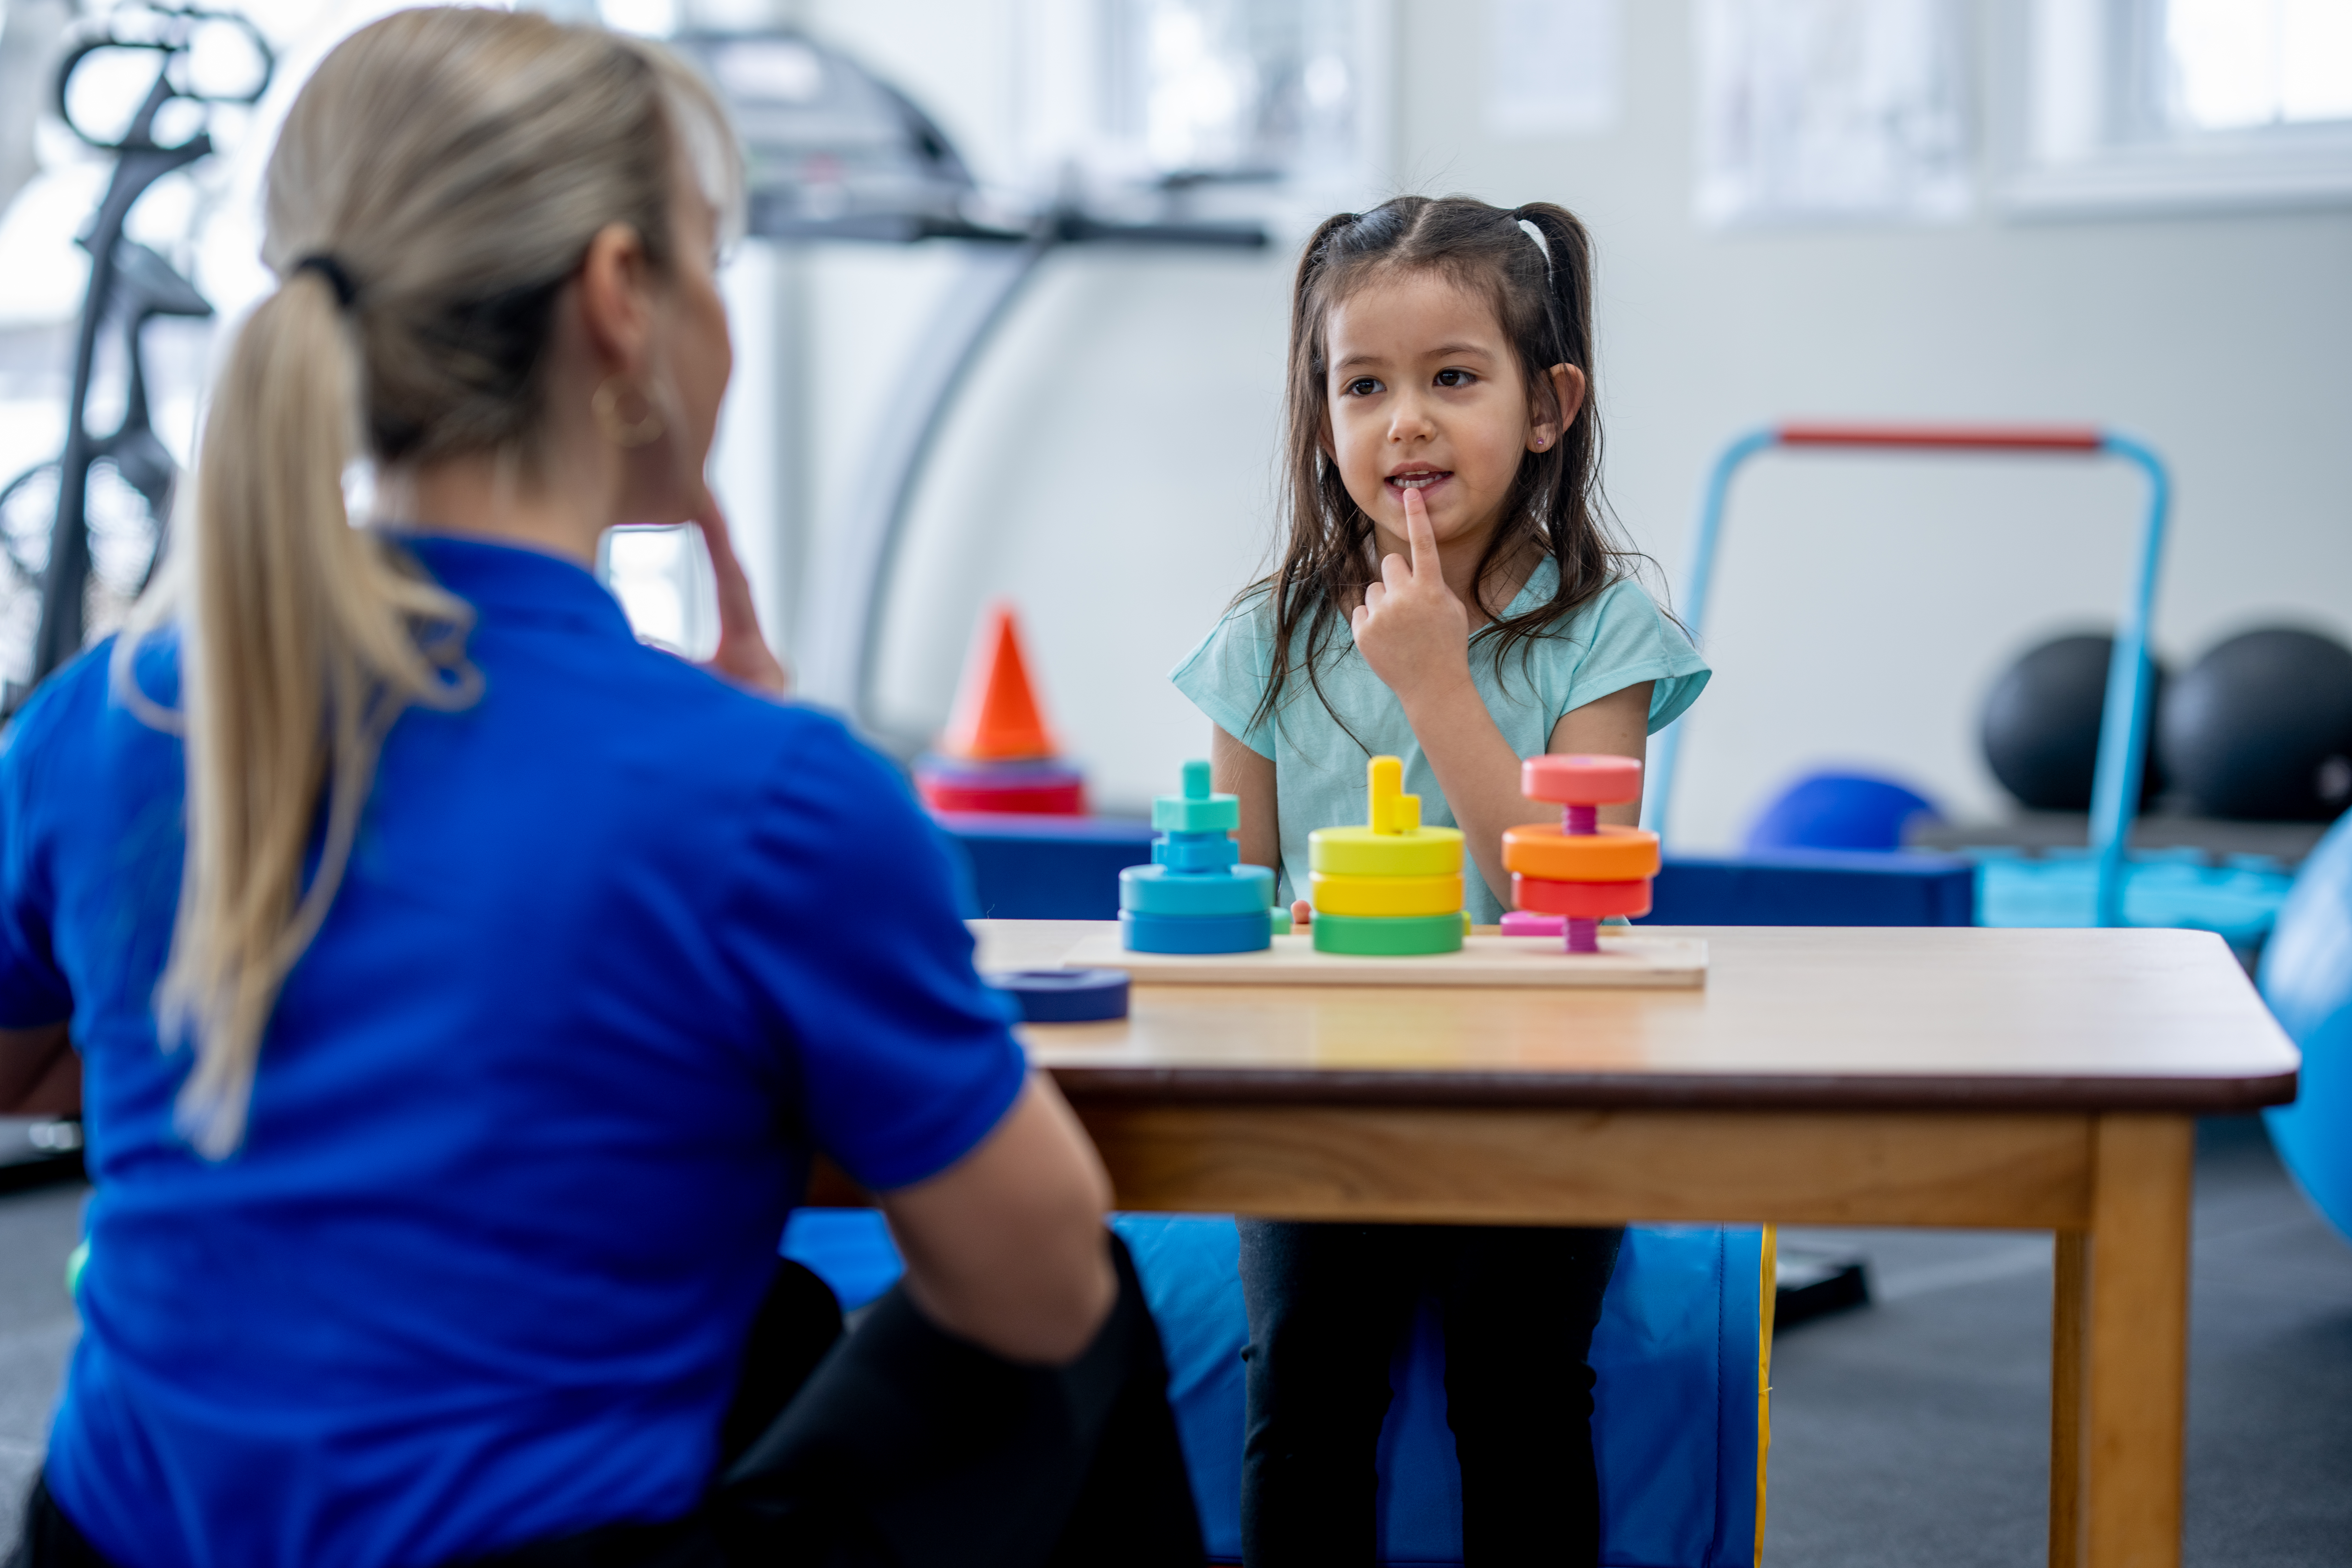 A female Speech Therapist works with a little girl on forming her letters and sounds.  The two are seated at a small wooden table facing each other as the little girl mimics the therapists sounds.